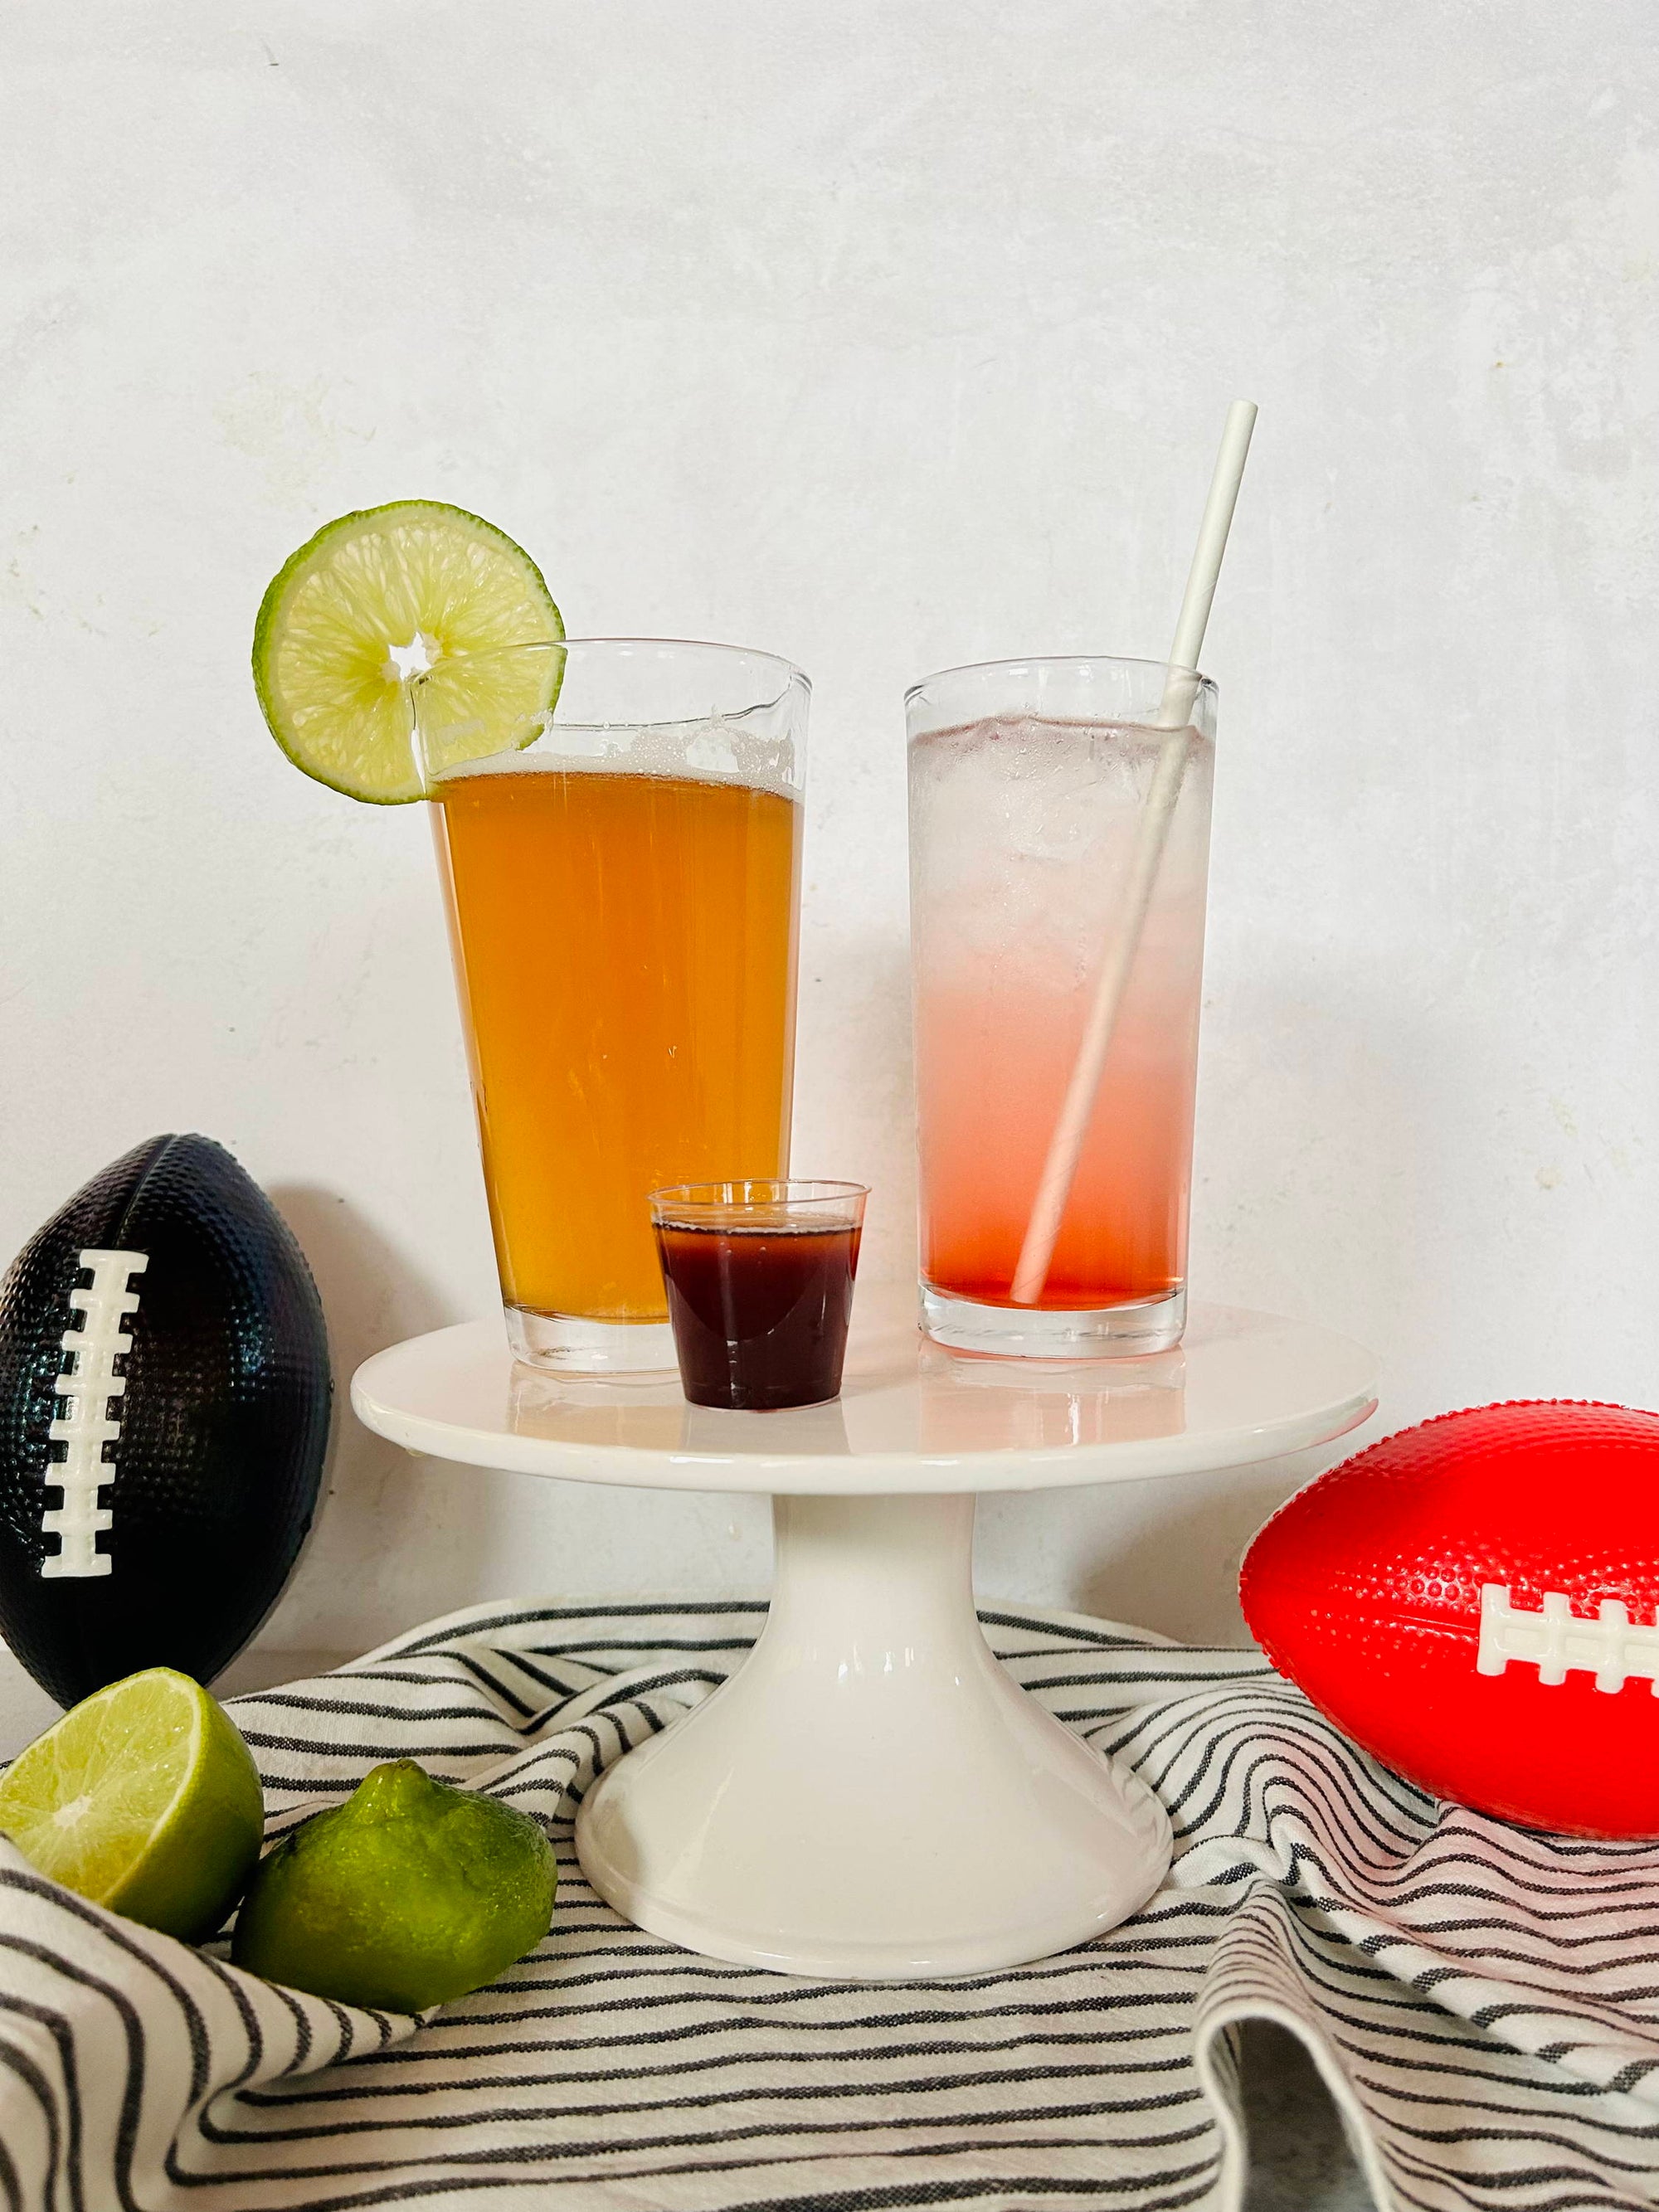 Super Bowl 57 Party Cocktails: Kansas City Iced Water and Philadelphia Citywide Special Shandy